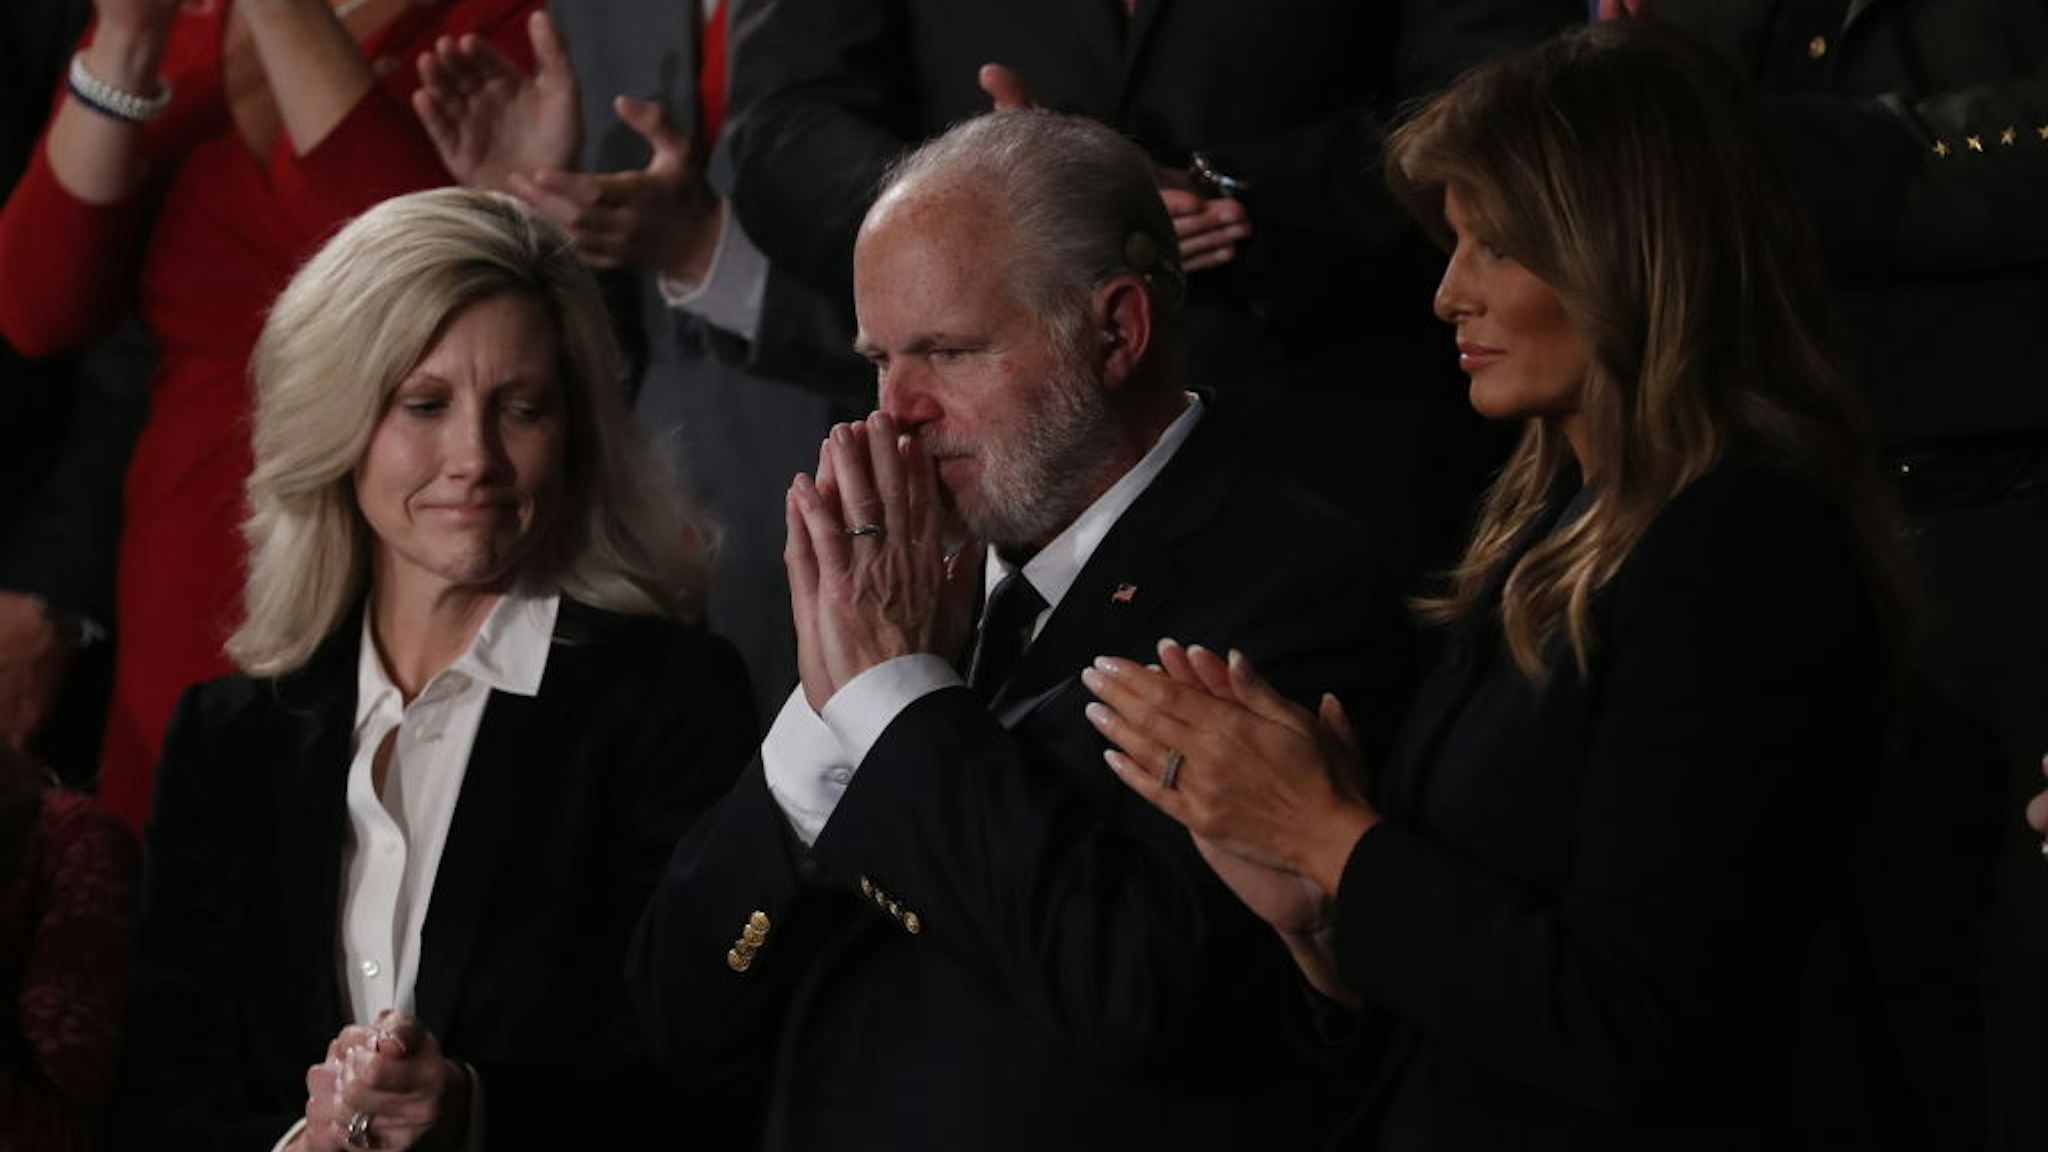 Conservative radio host Rush Limbaugh, who recently announced he's suffering from lung cancer, second right, reacts as he is awarded with the Presidential Medal of Freedom during a State of the Union address to a joint session of Congress at the U.S. Capitol in Washington, D.C., U.S., on Tuesday, Feb. 4, 2020.